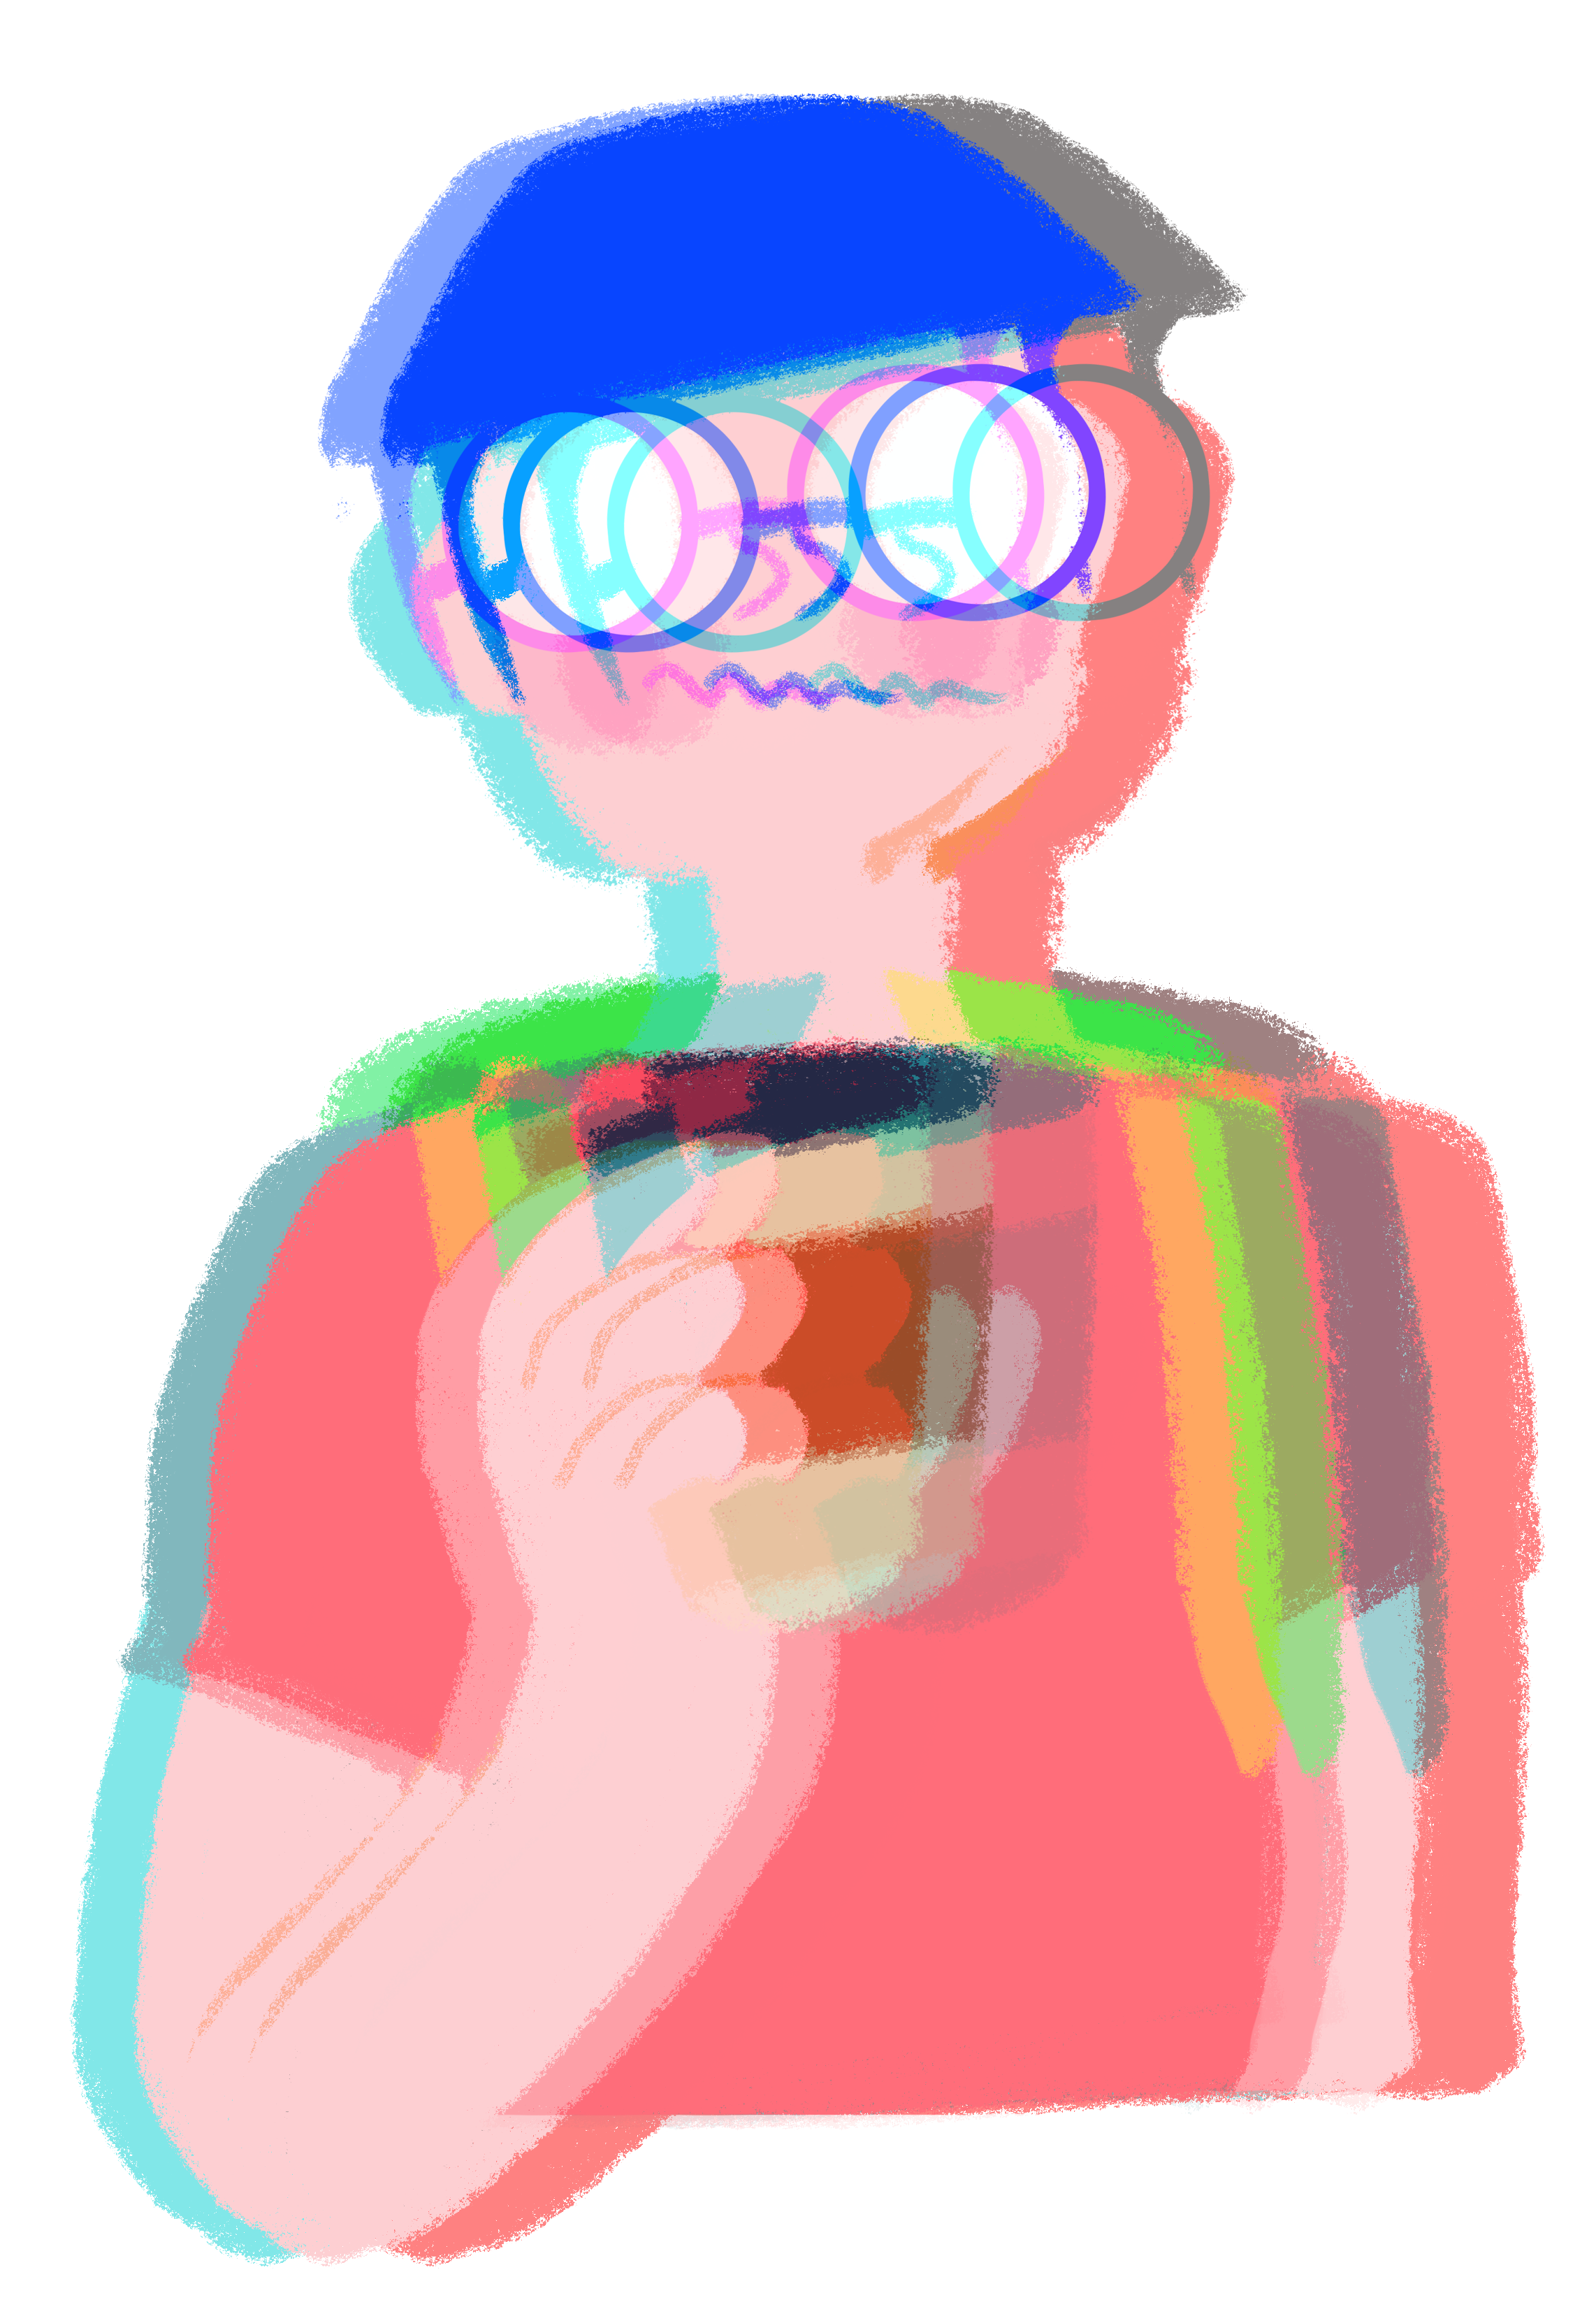 An illustration of a student holding a cup of coffee. They are wearing large glasses, and the image is layered with some transparency, giving the illusion of being overcaffeinated.